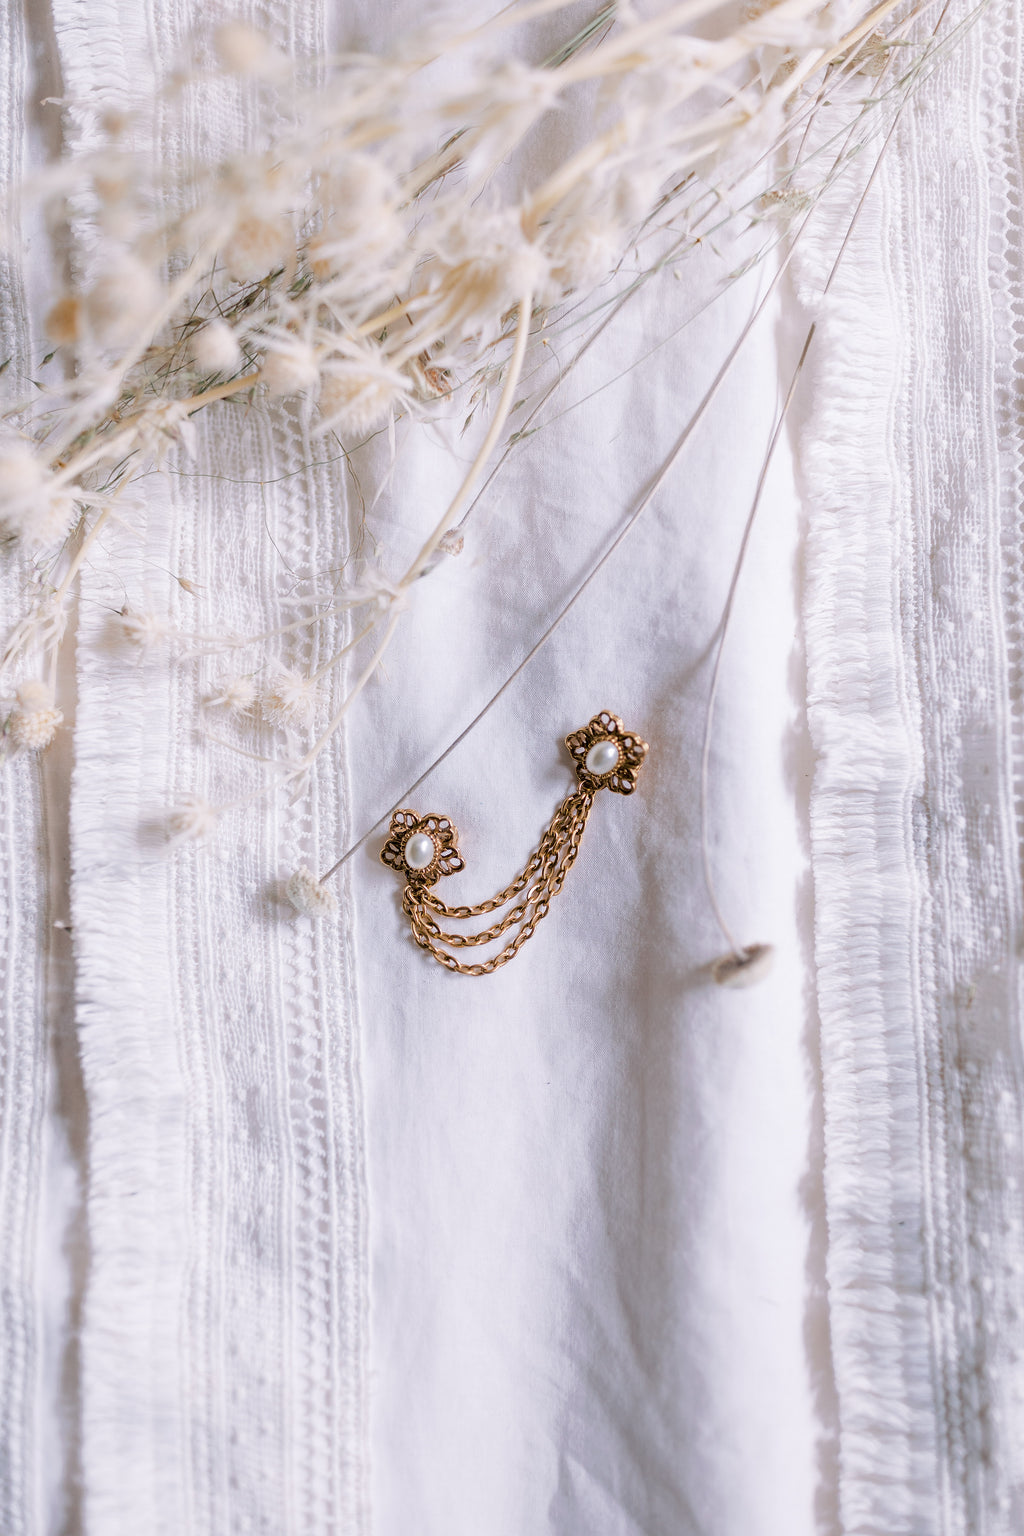 Vintage Floral Pearl Chain Pin